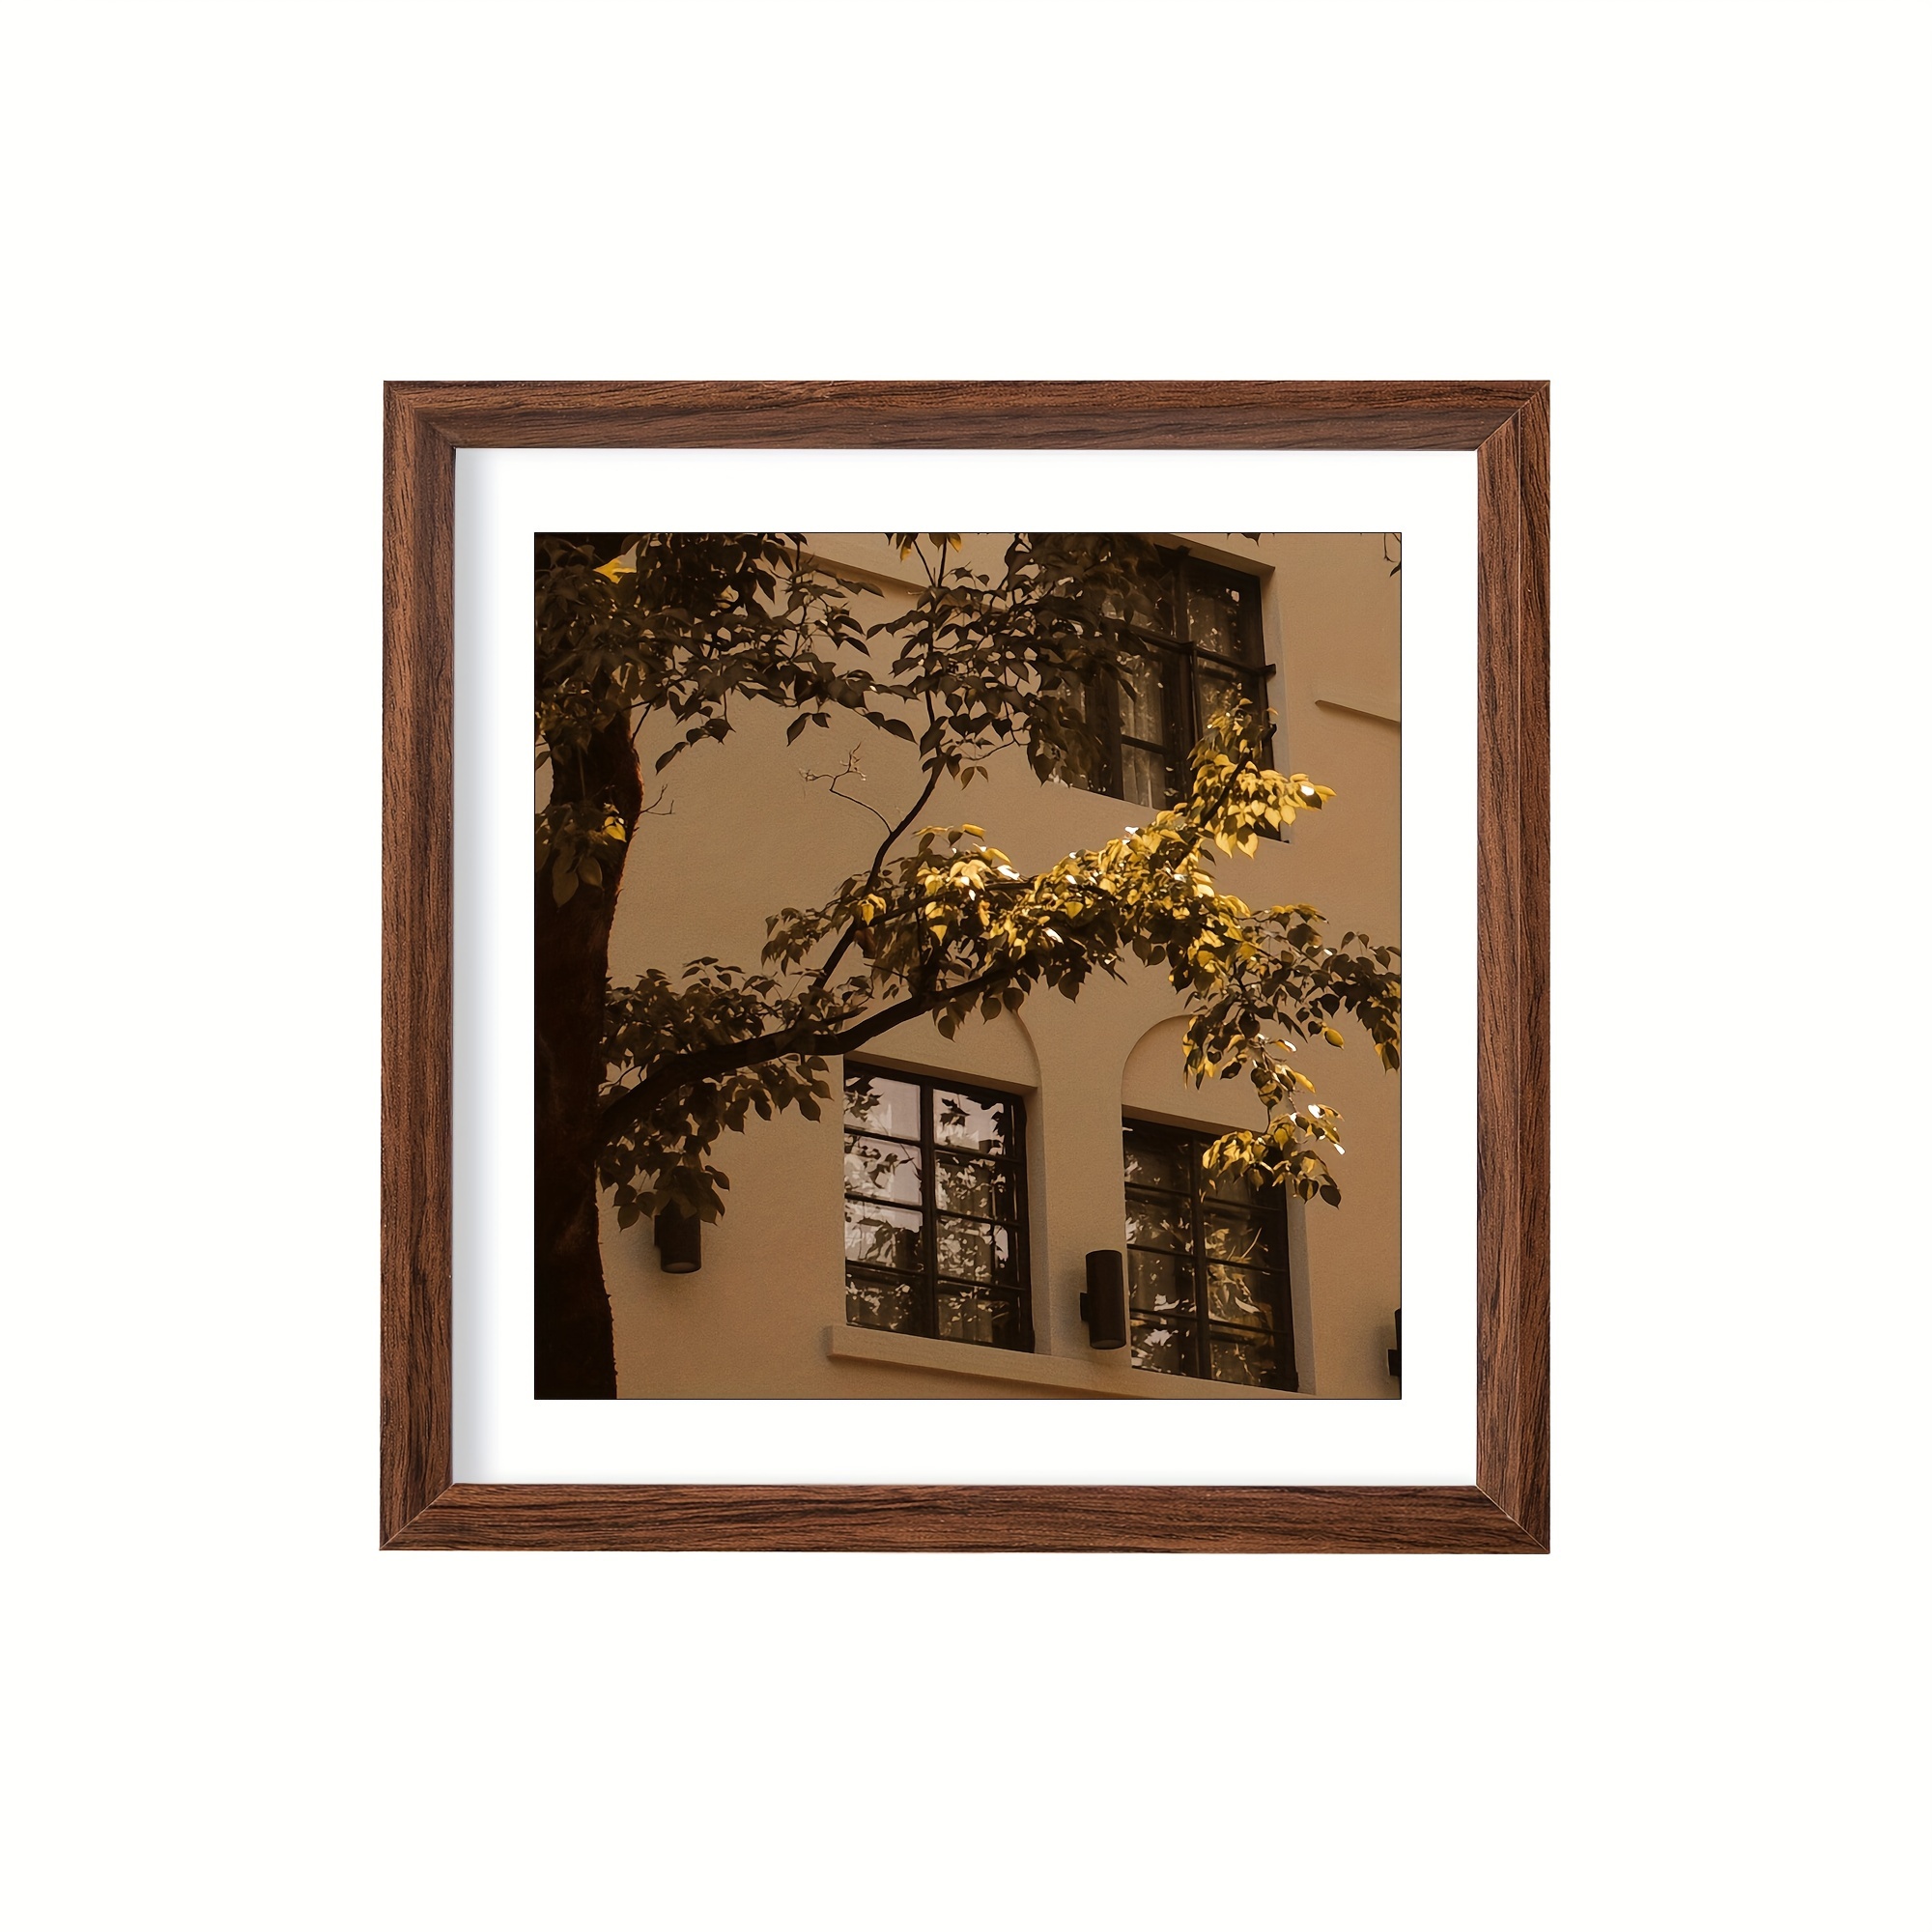 

Classic Style Walnut Square Photo Frame - Wall & Tabletop Picture Frame For Art, Home, Office, Living Room Decor, Horizontal Orientation, Ideal For Birthday, Mother's Day & New Year Gifts